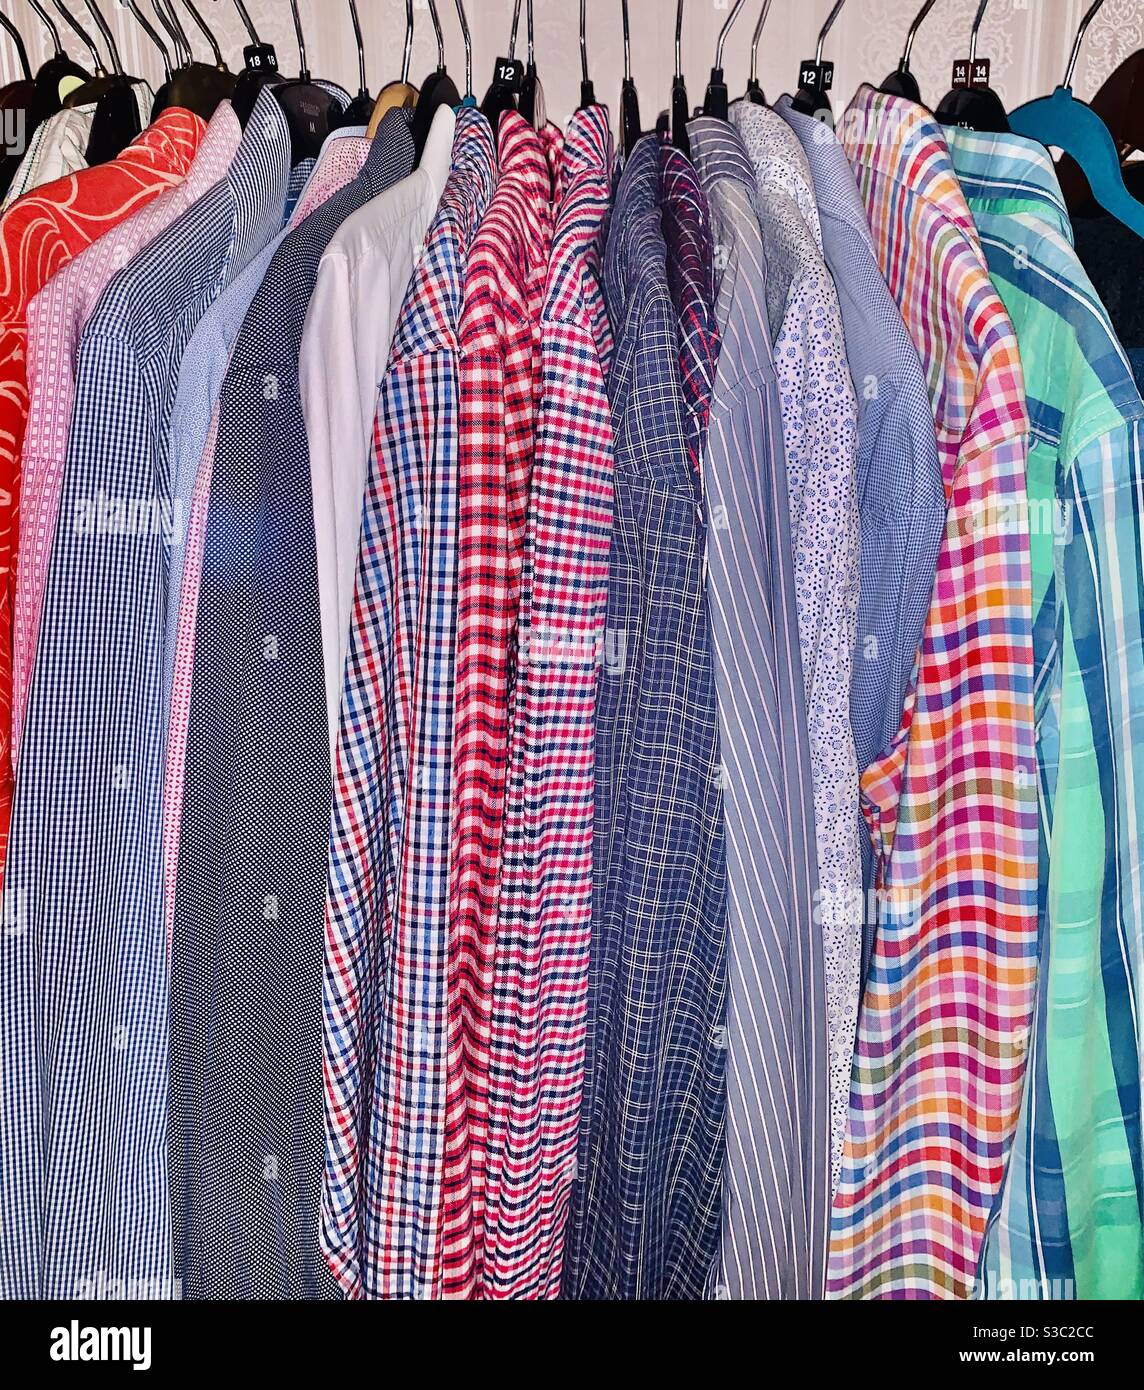 Wardrobe of work shirts. No longer worn due to lockdown a d remote working. Stock Photo